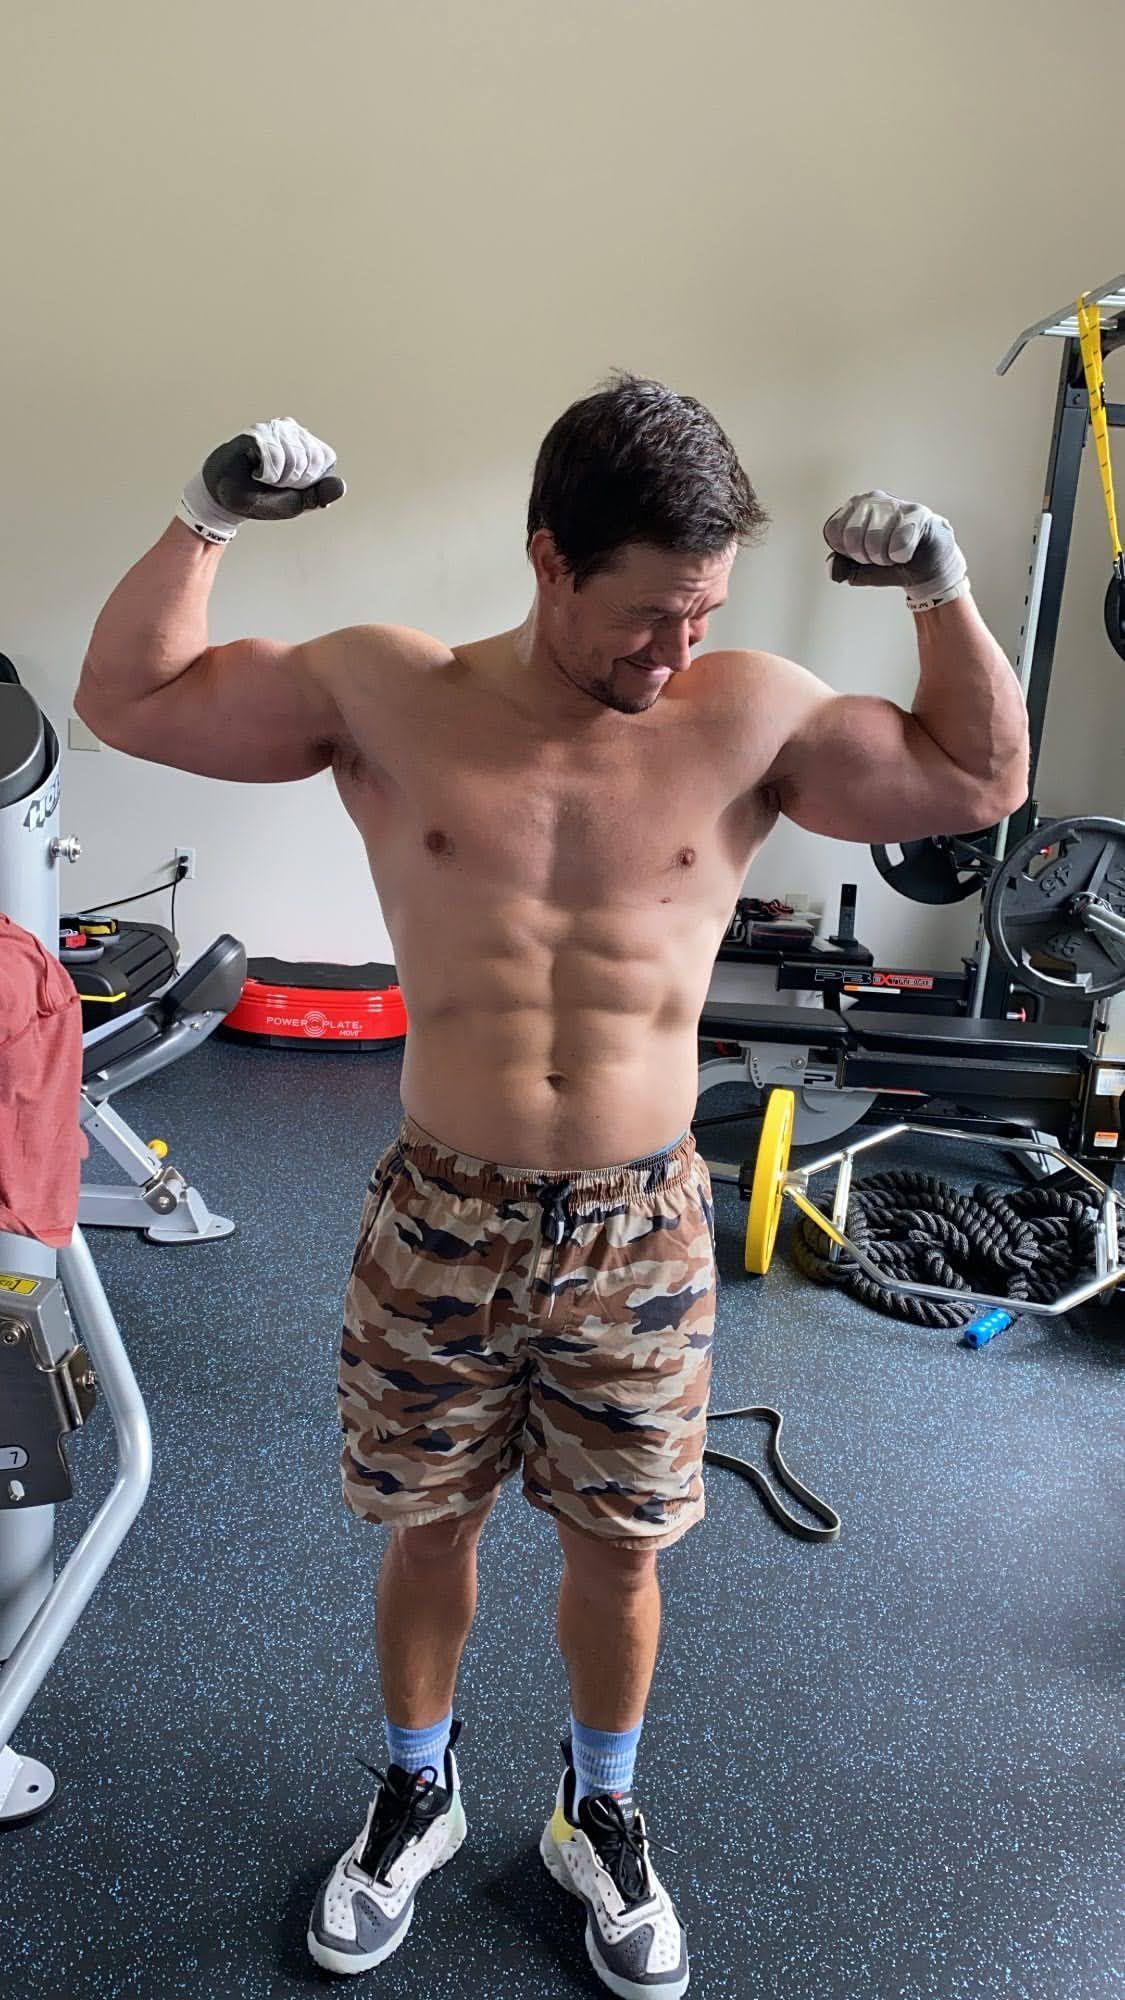 OneoffPost: Mark Wahlberg Shirtless from Insta Story.